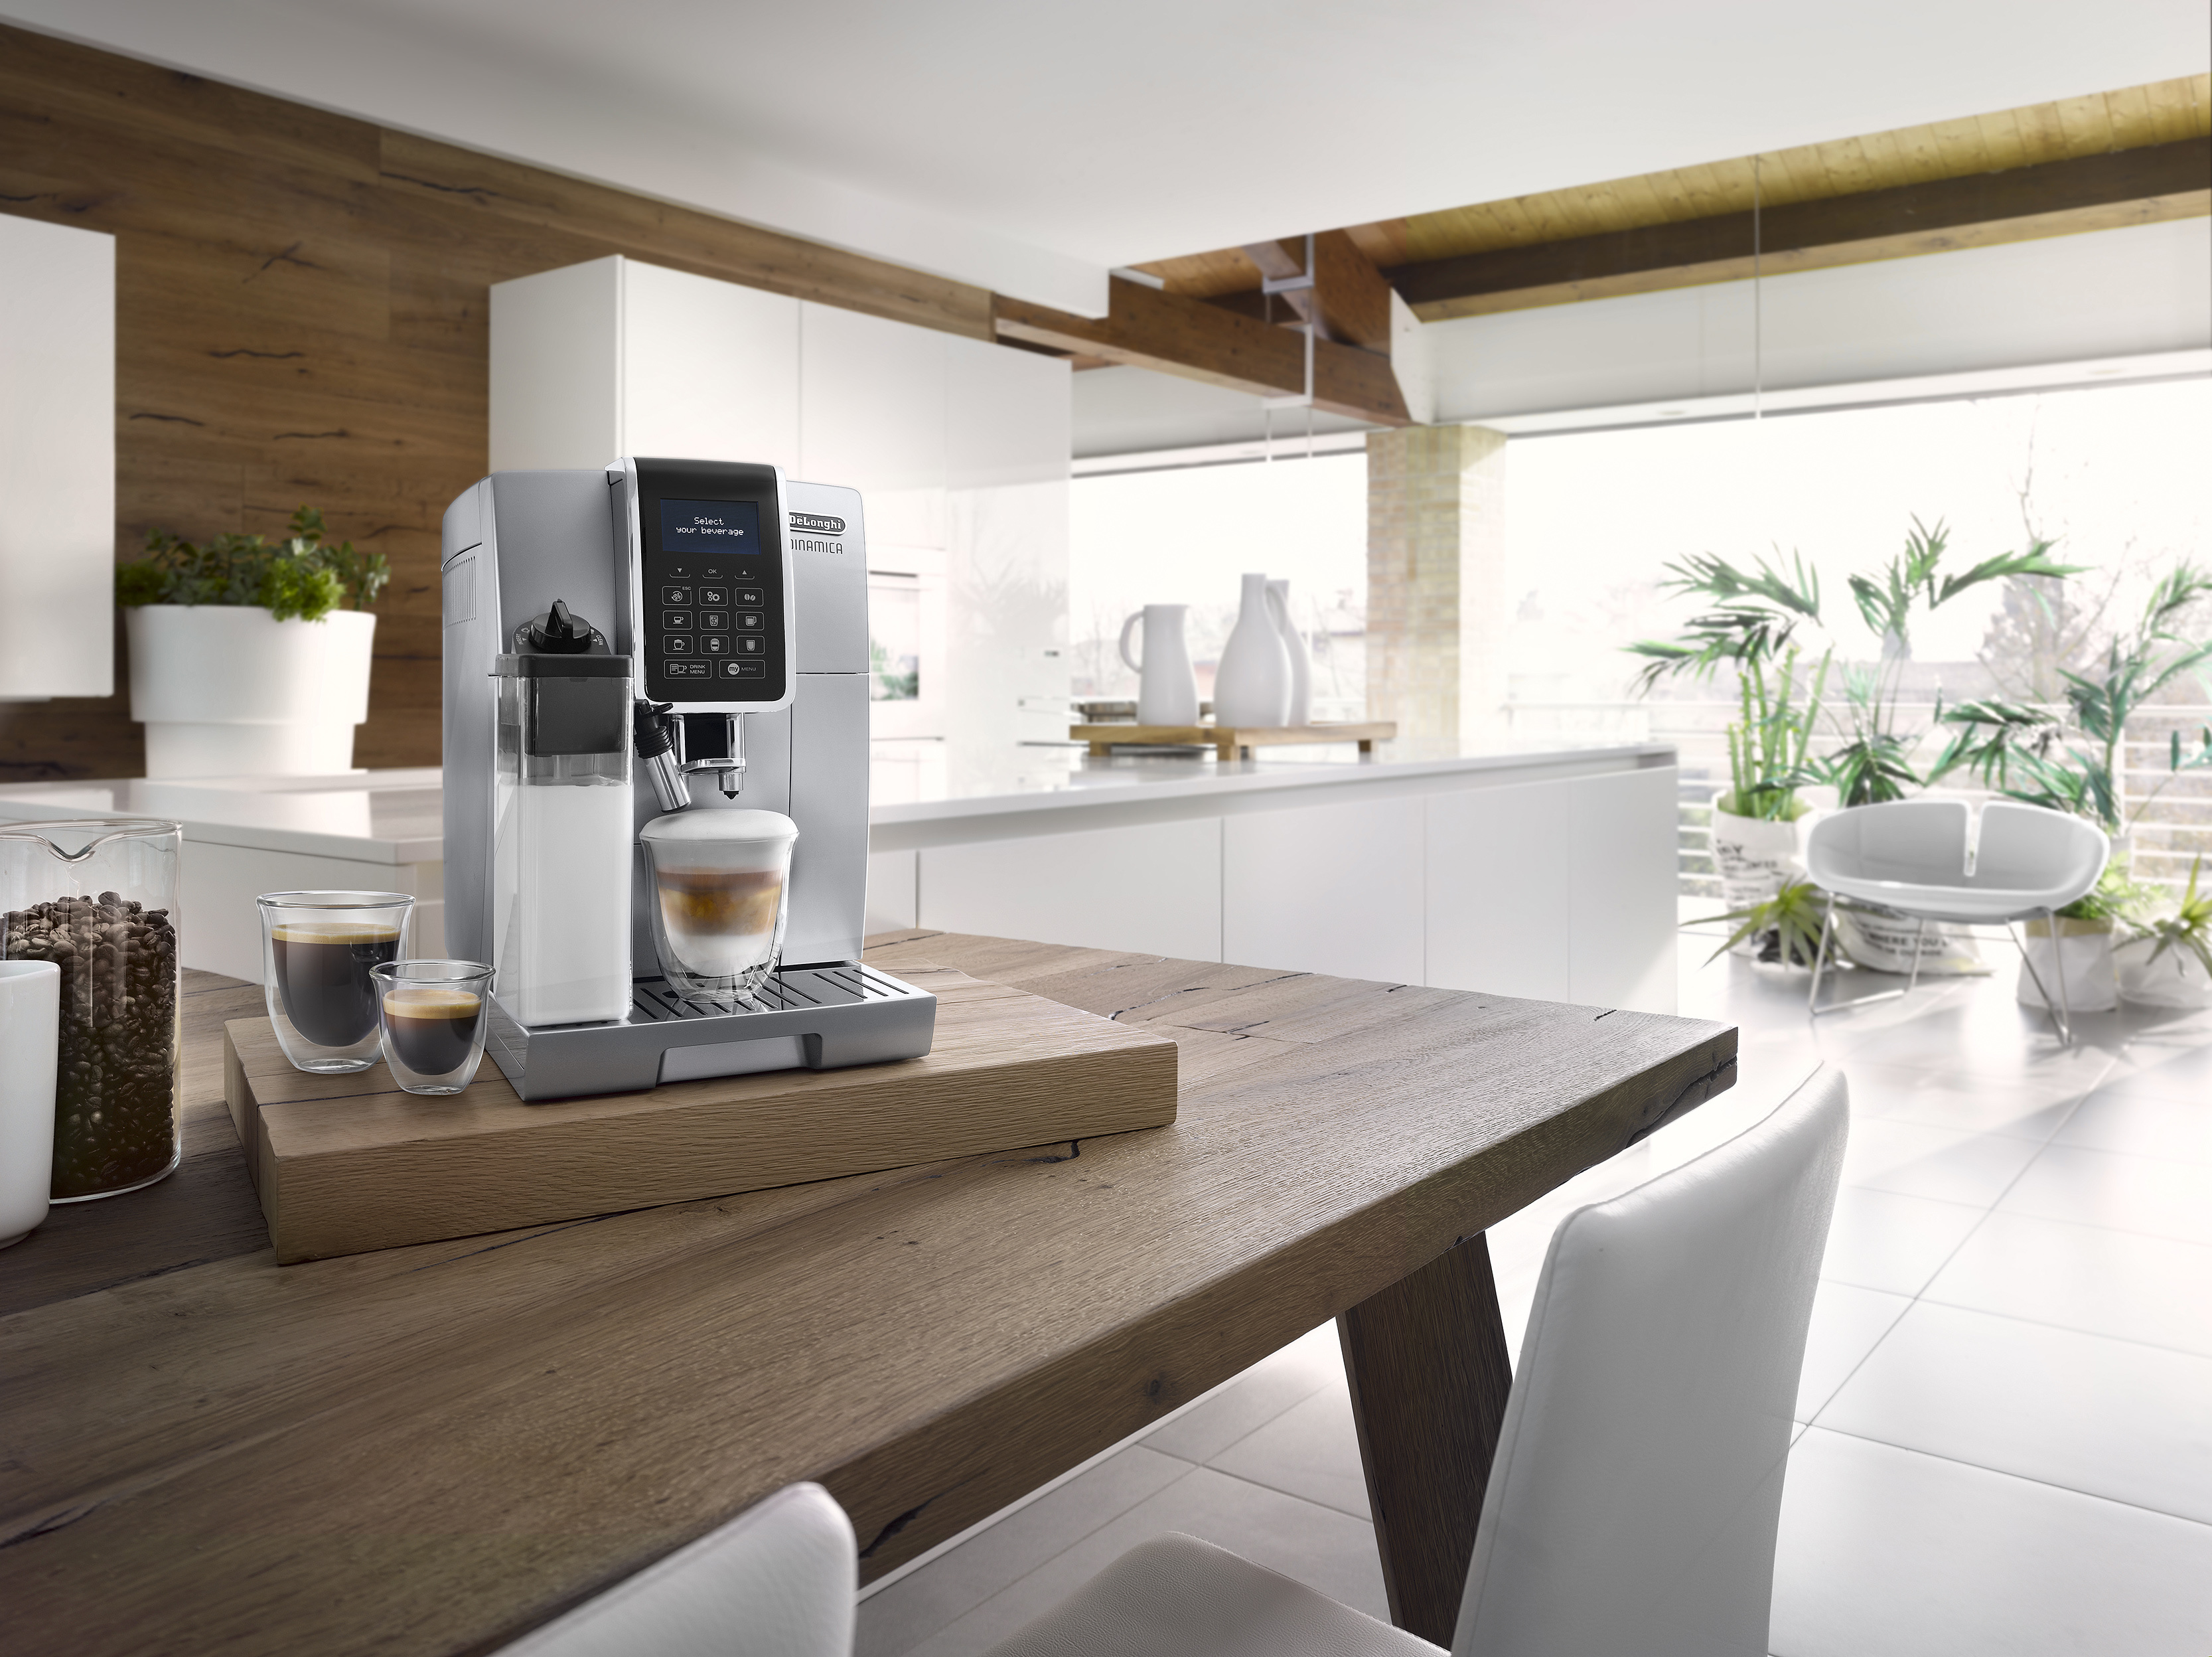 De'Longhi Elevates the At-Home Coffee Experience with Full Coffee 